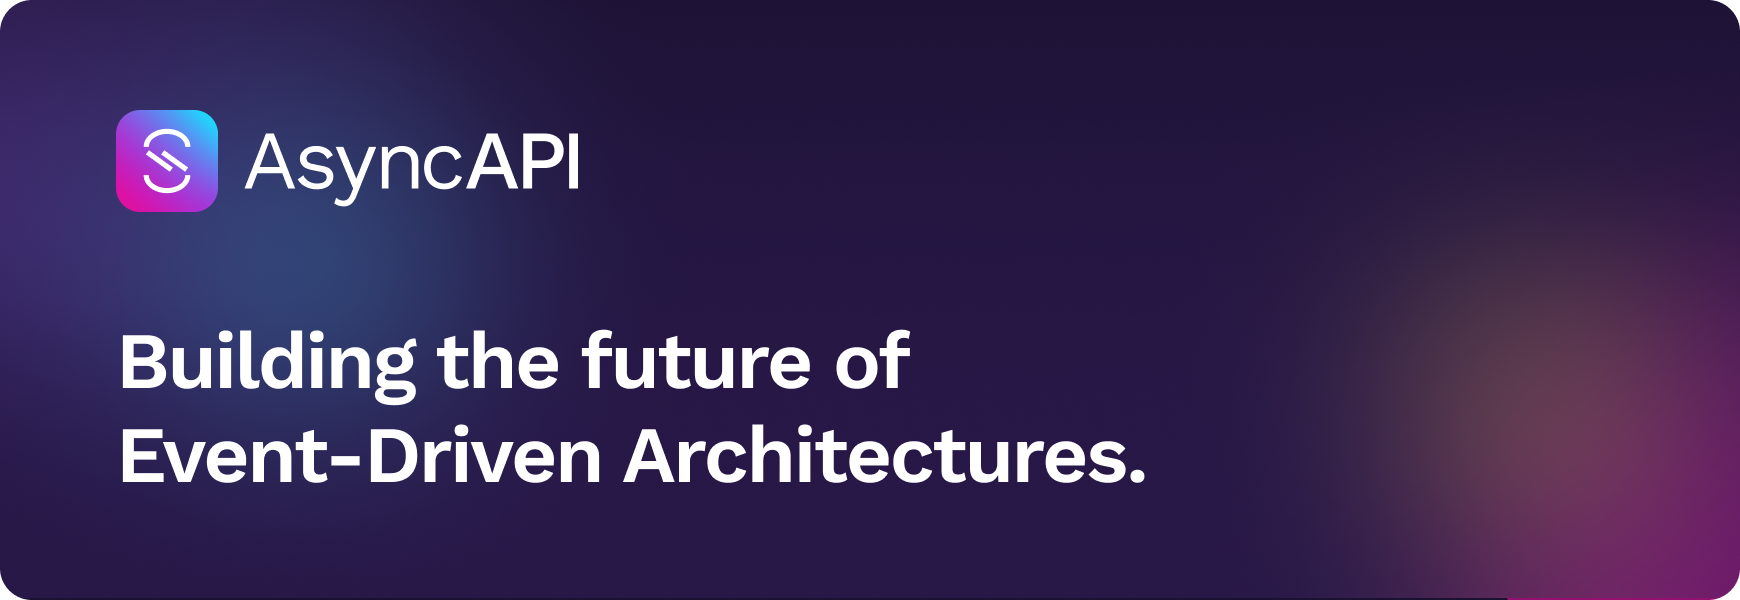 AsyncAPI logo - Building the future of Event-Driven Architectures.